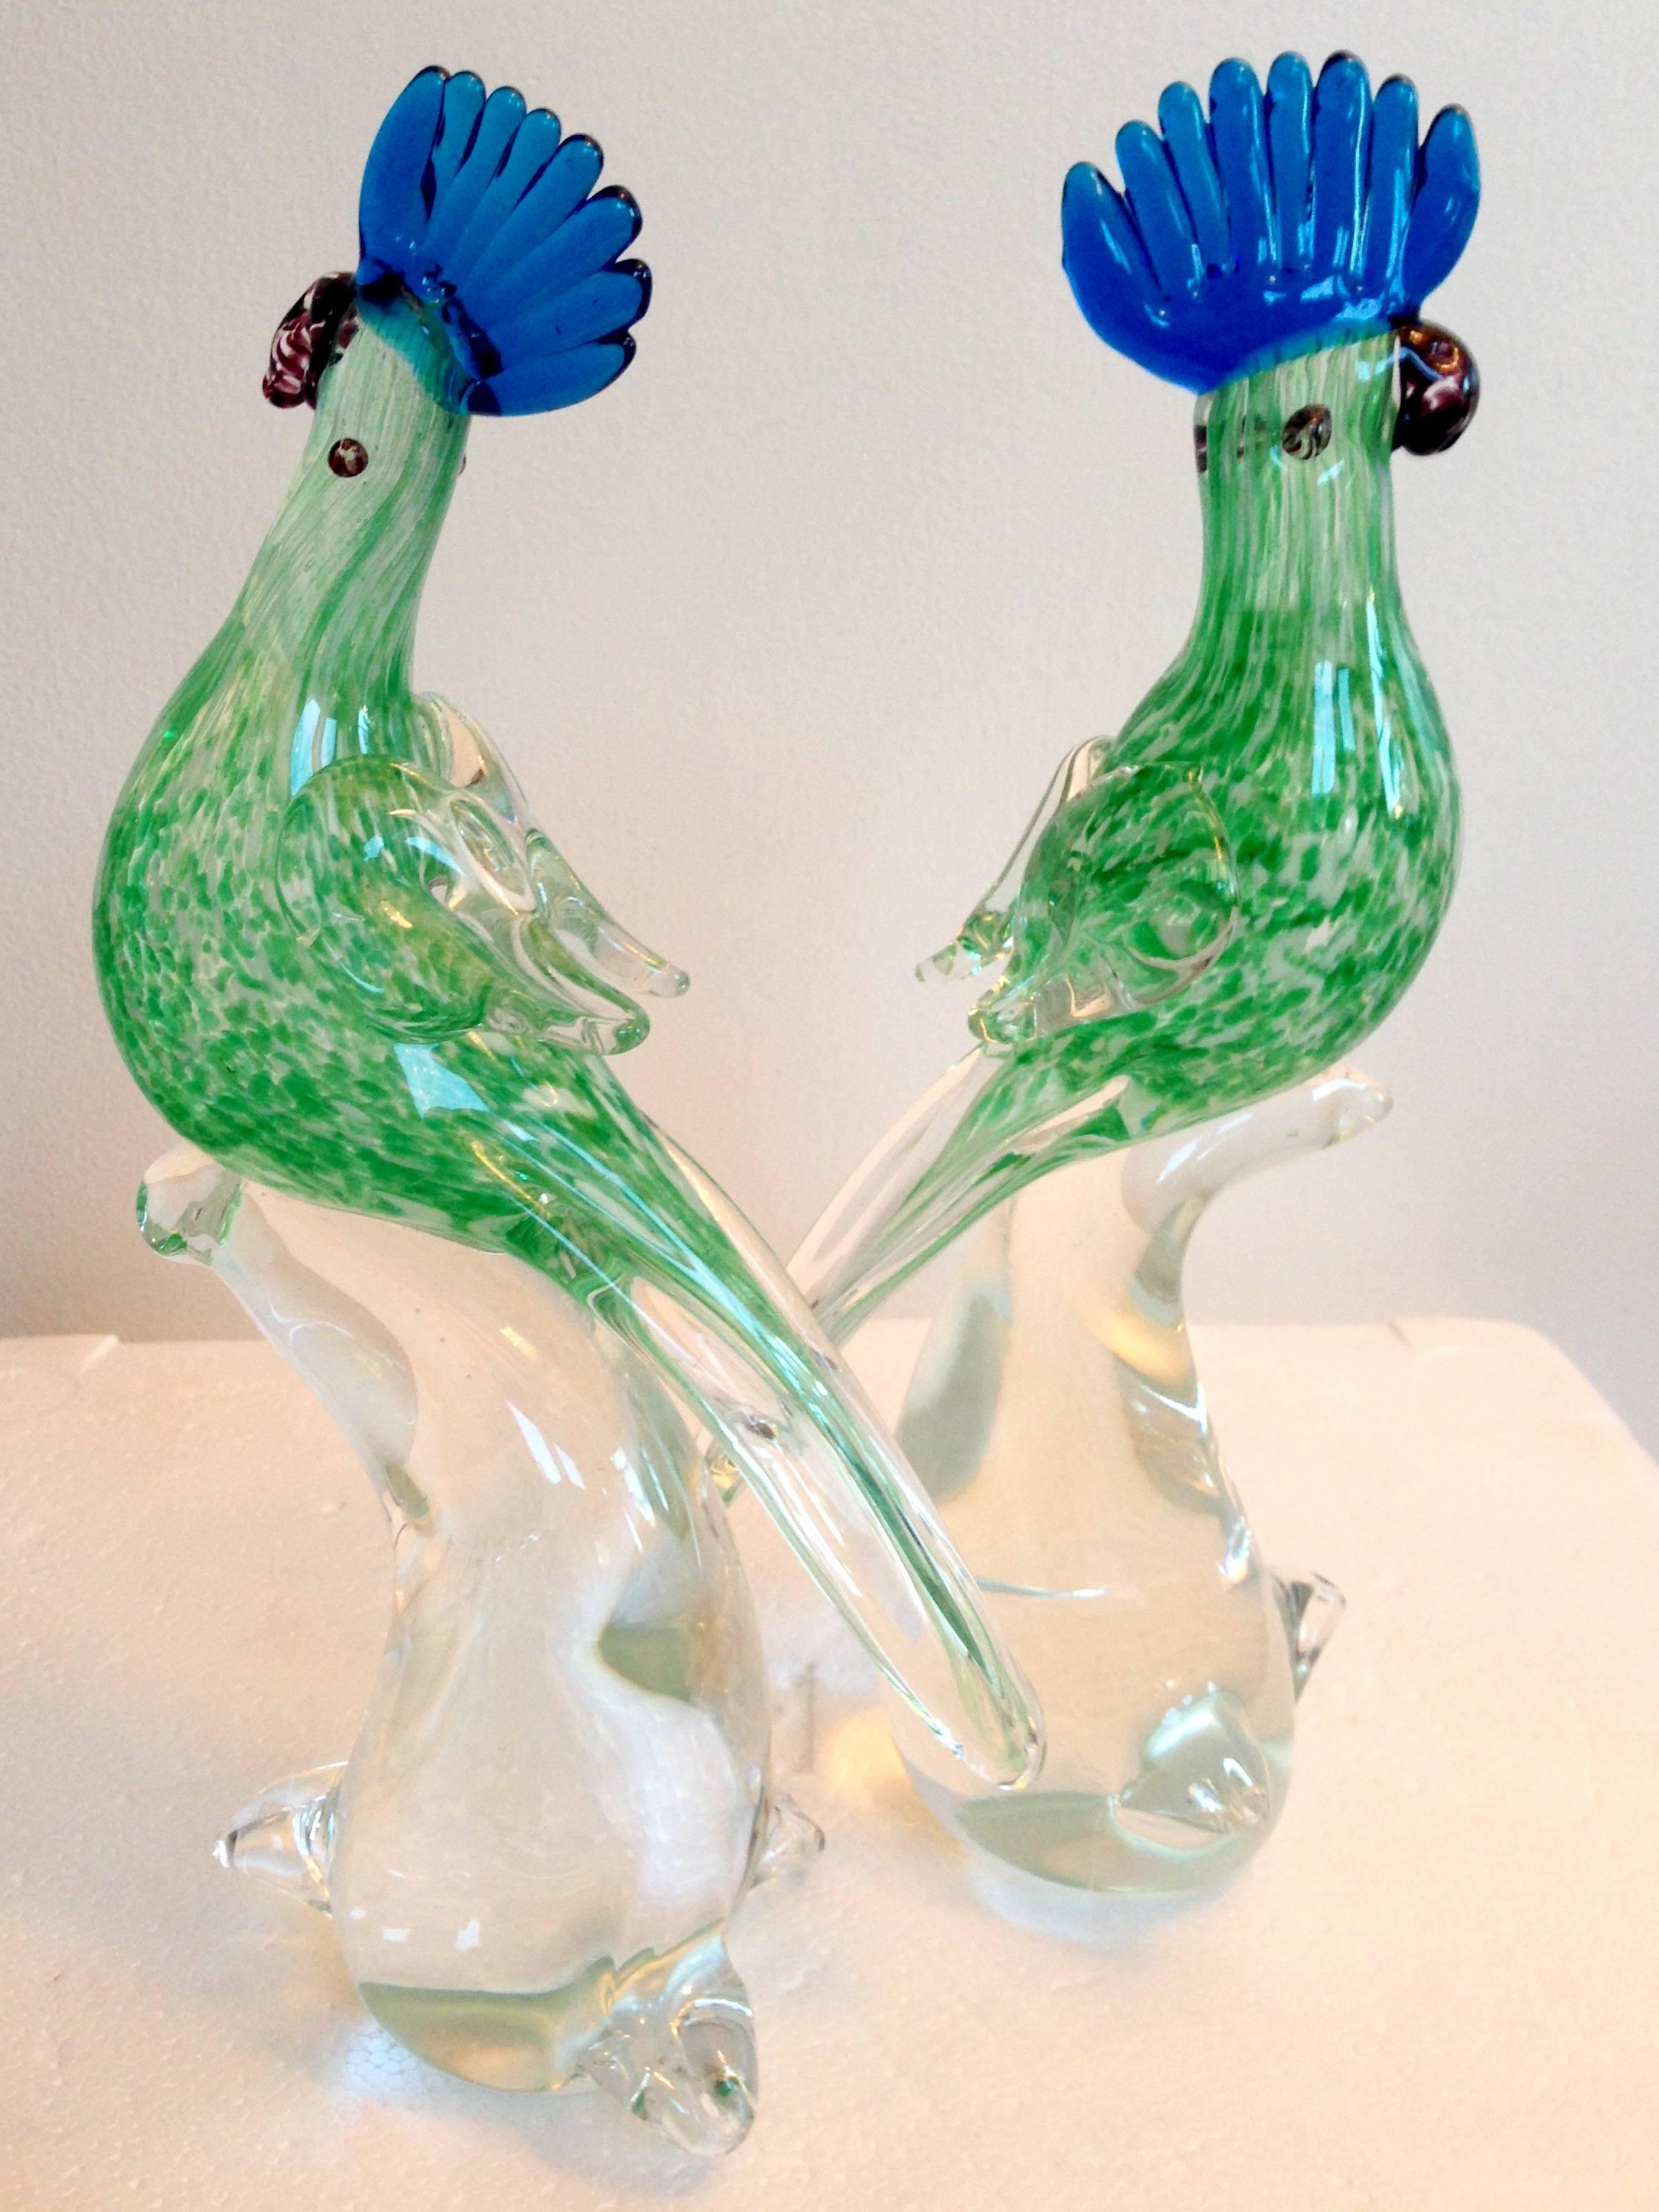 Pair of Murano-style art glass male and female love birds with vibrant blue and green accents. Female bird, 10.5